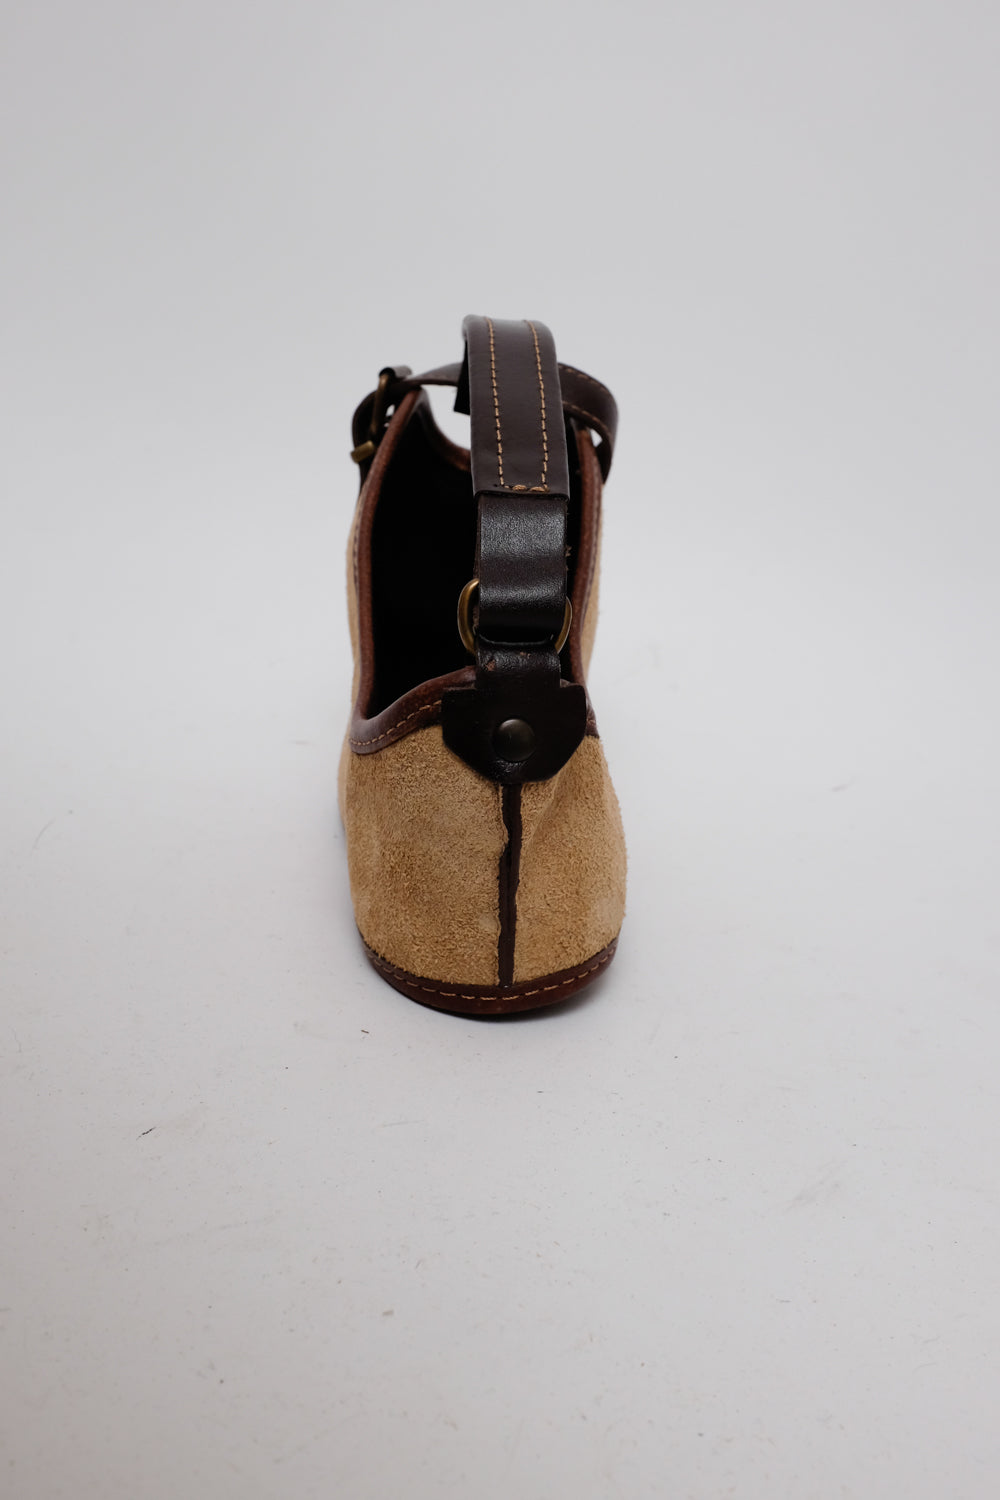 CURVED SMALL BROWN SUEDE LEATHER BAG